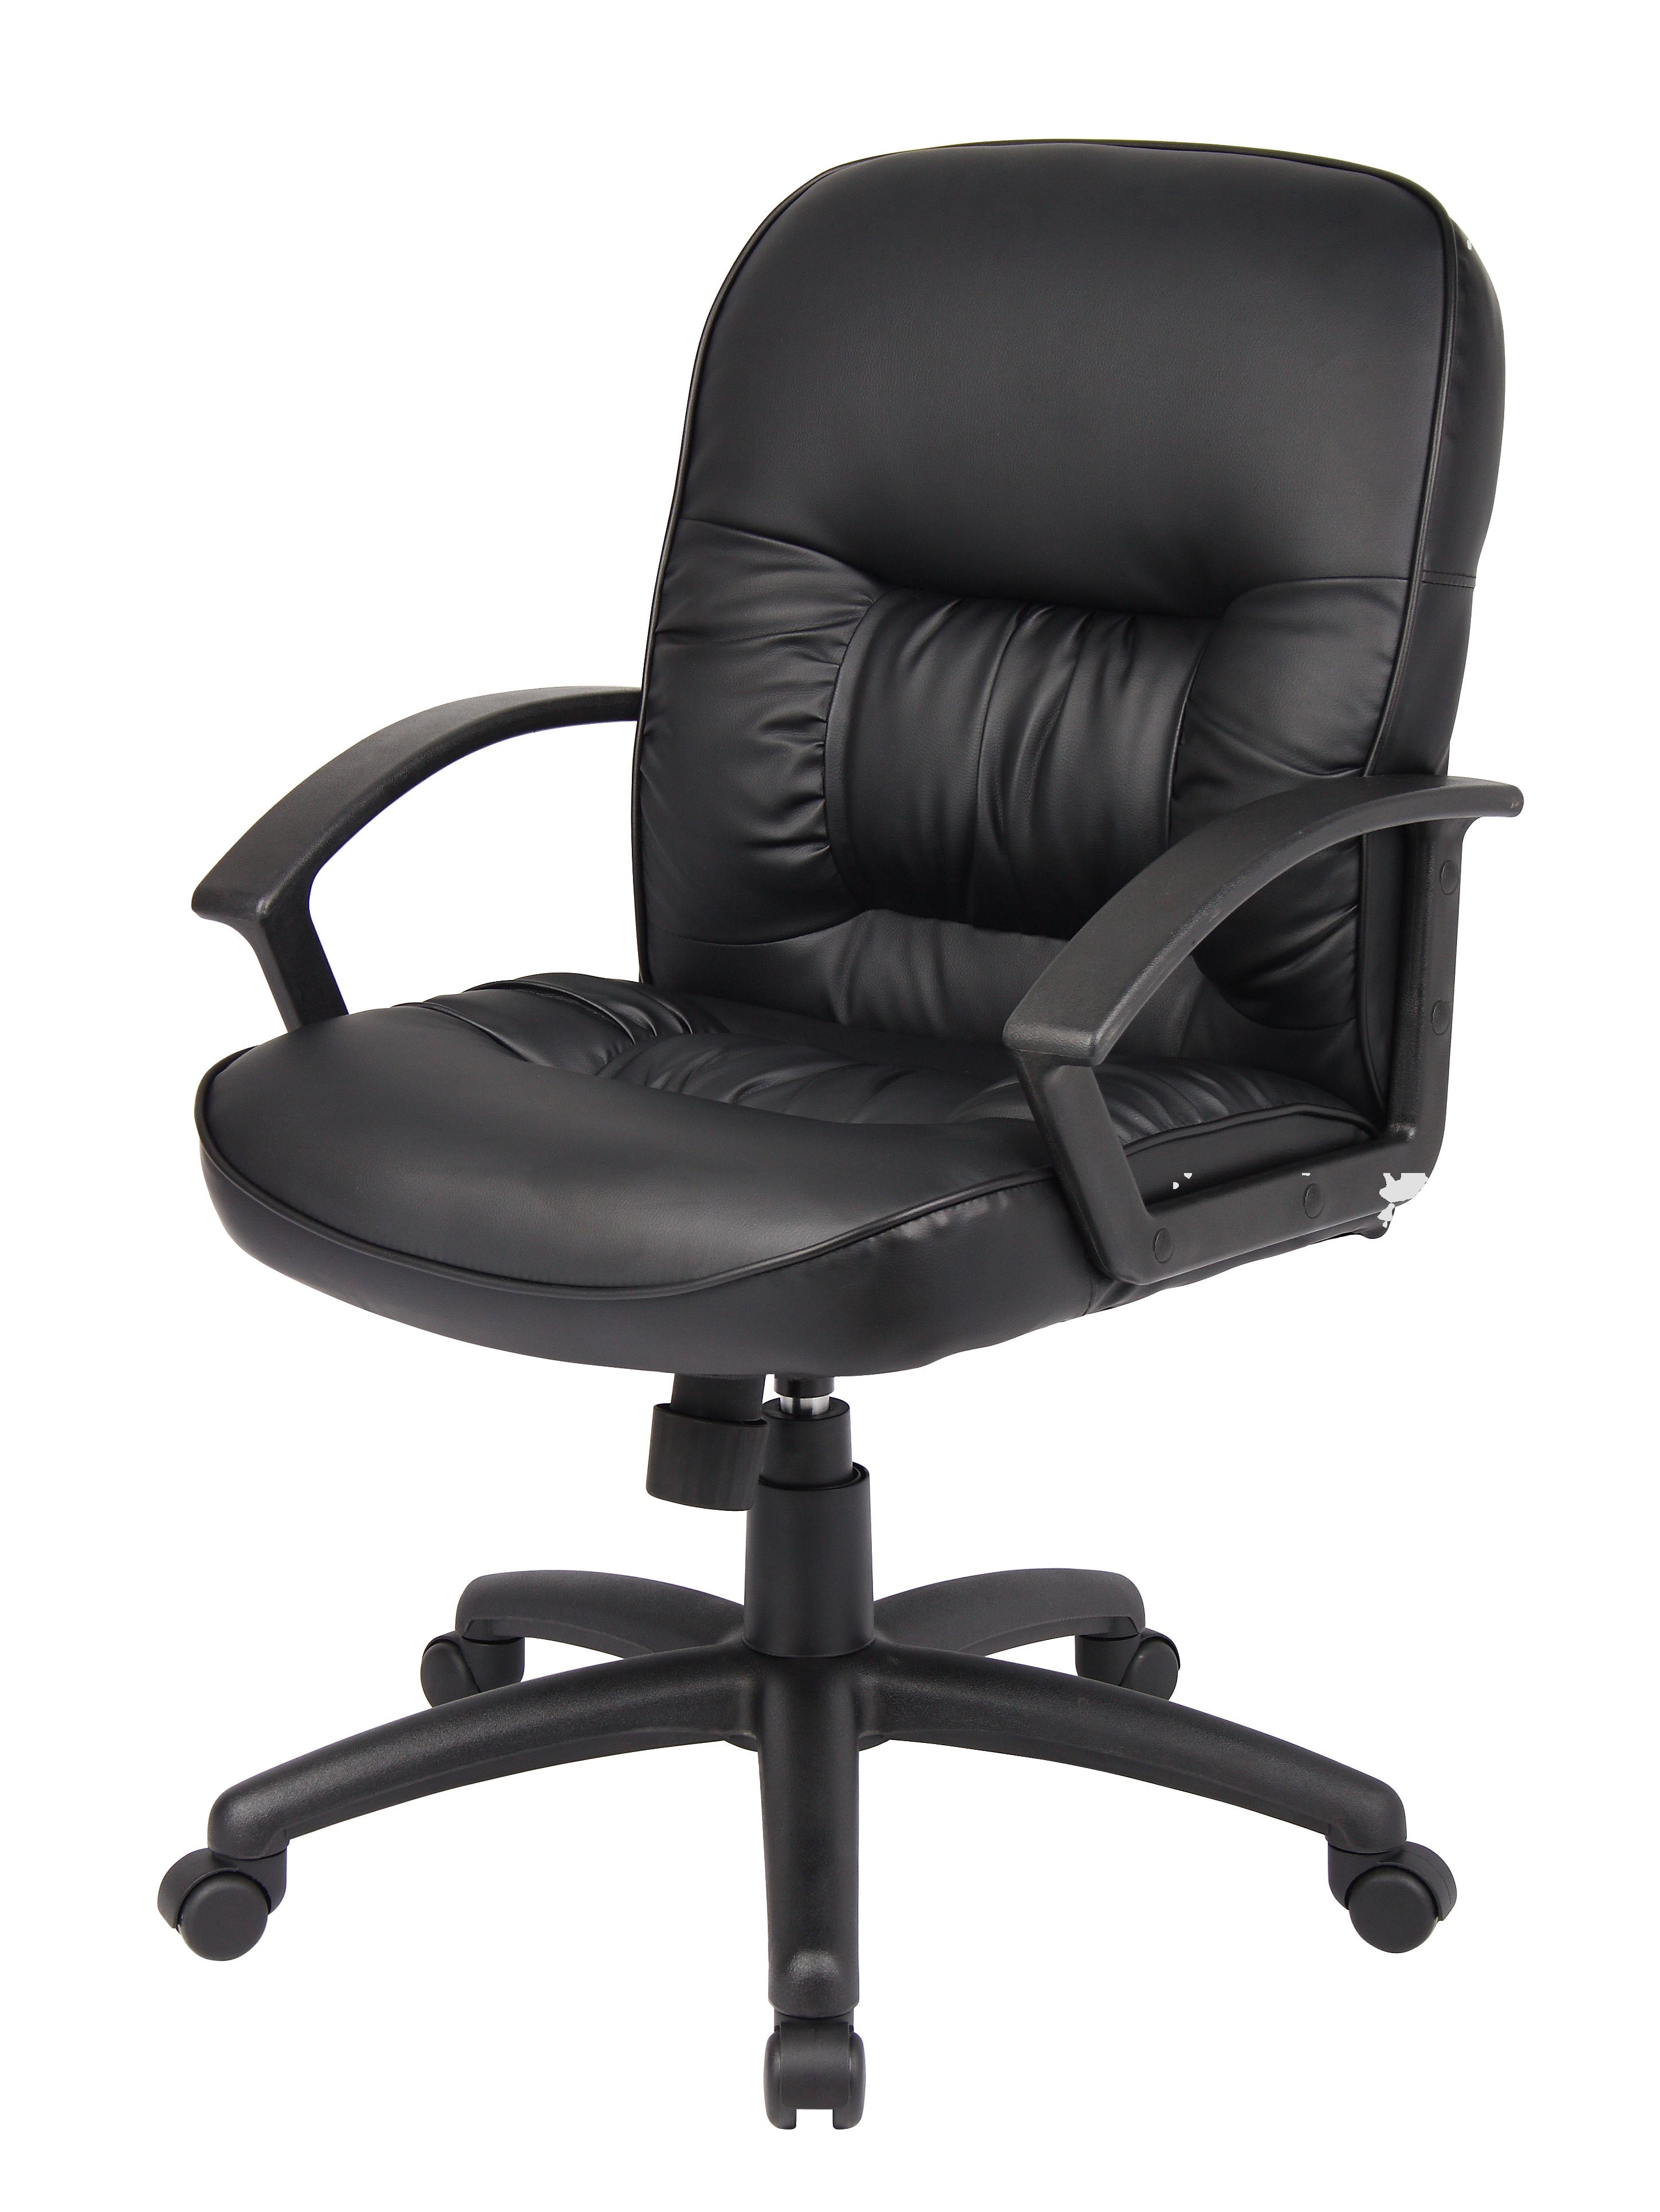 B7306 - Executive LeatherPlus Office Chair Mid Back